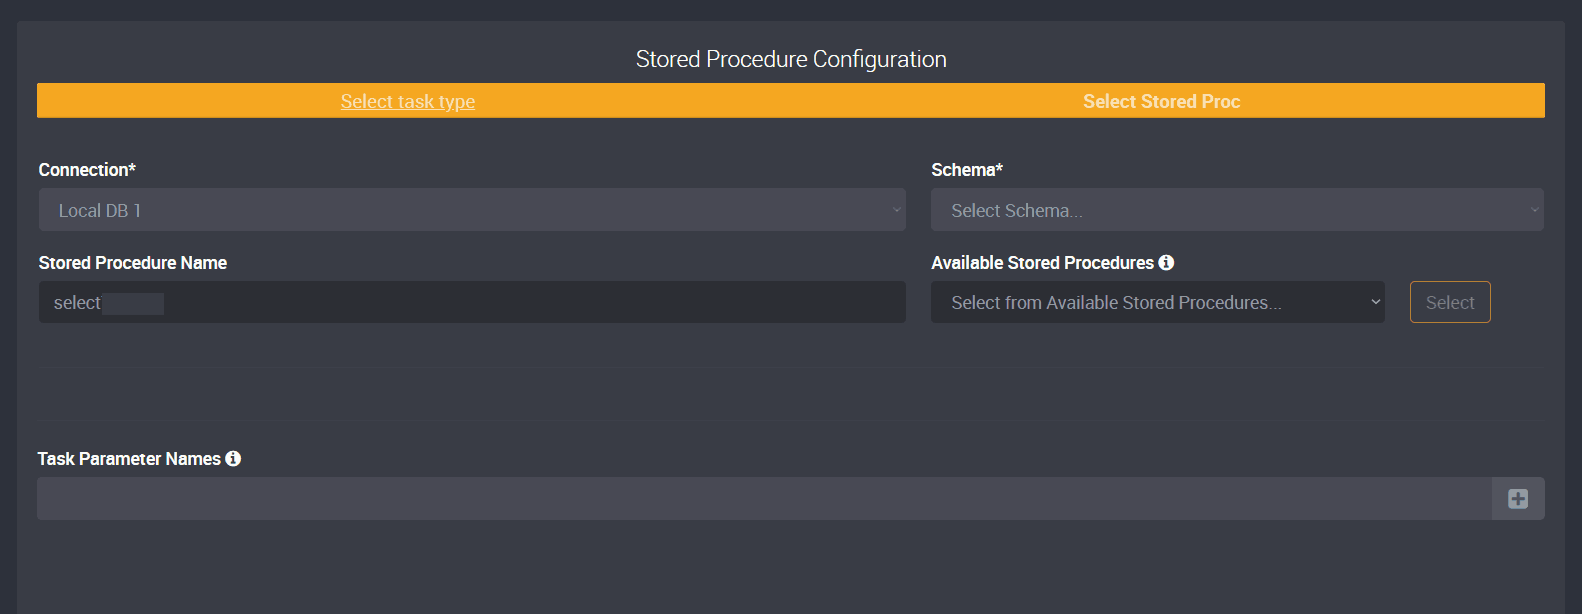 stored proc selector